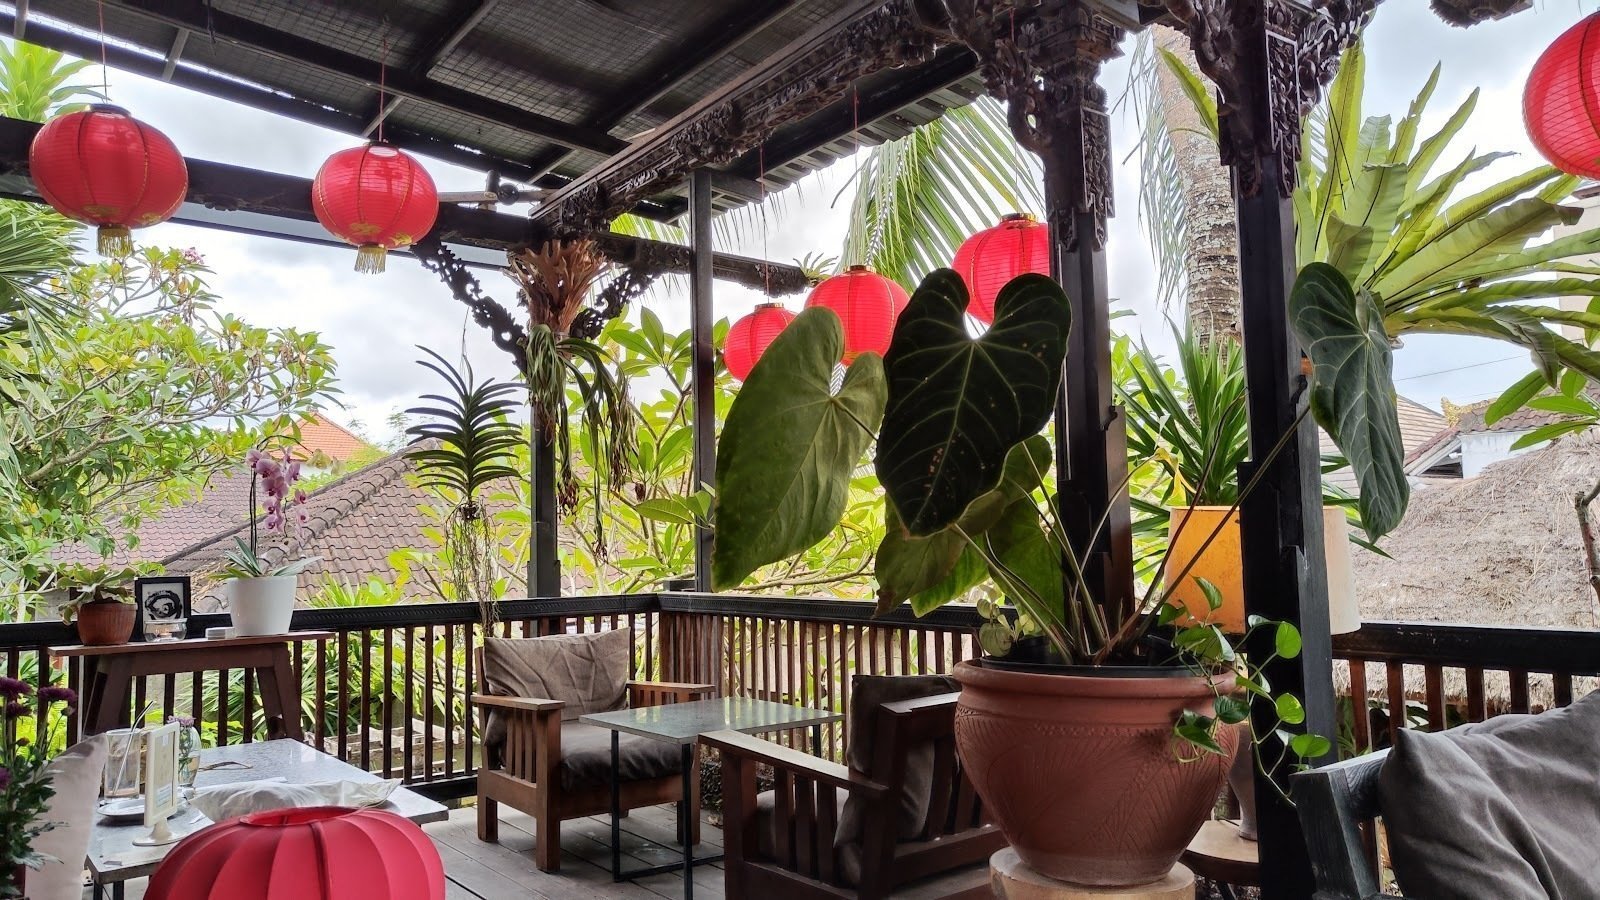 <span class="translation_missing" title="translation missing: en.meta.location_title, location_name: The Hidden Space Cafe, city: Ubud">Location Title</span>